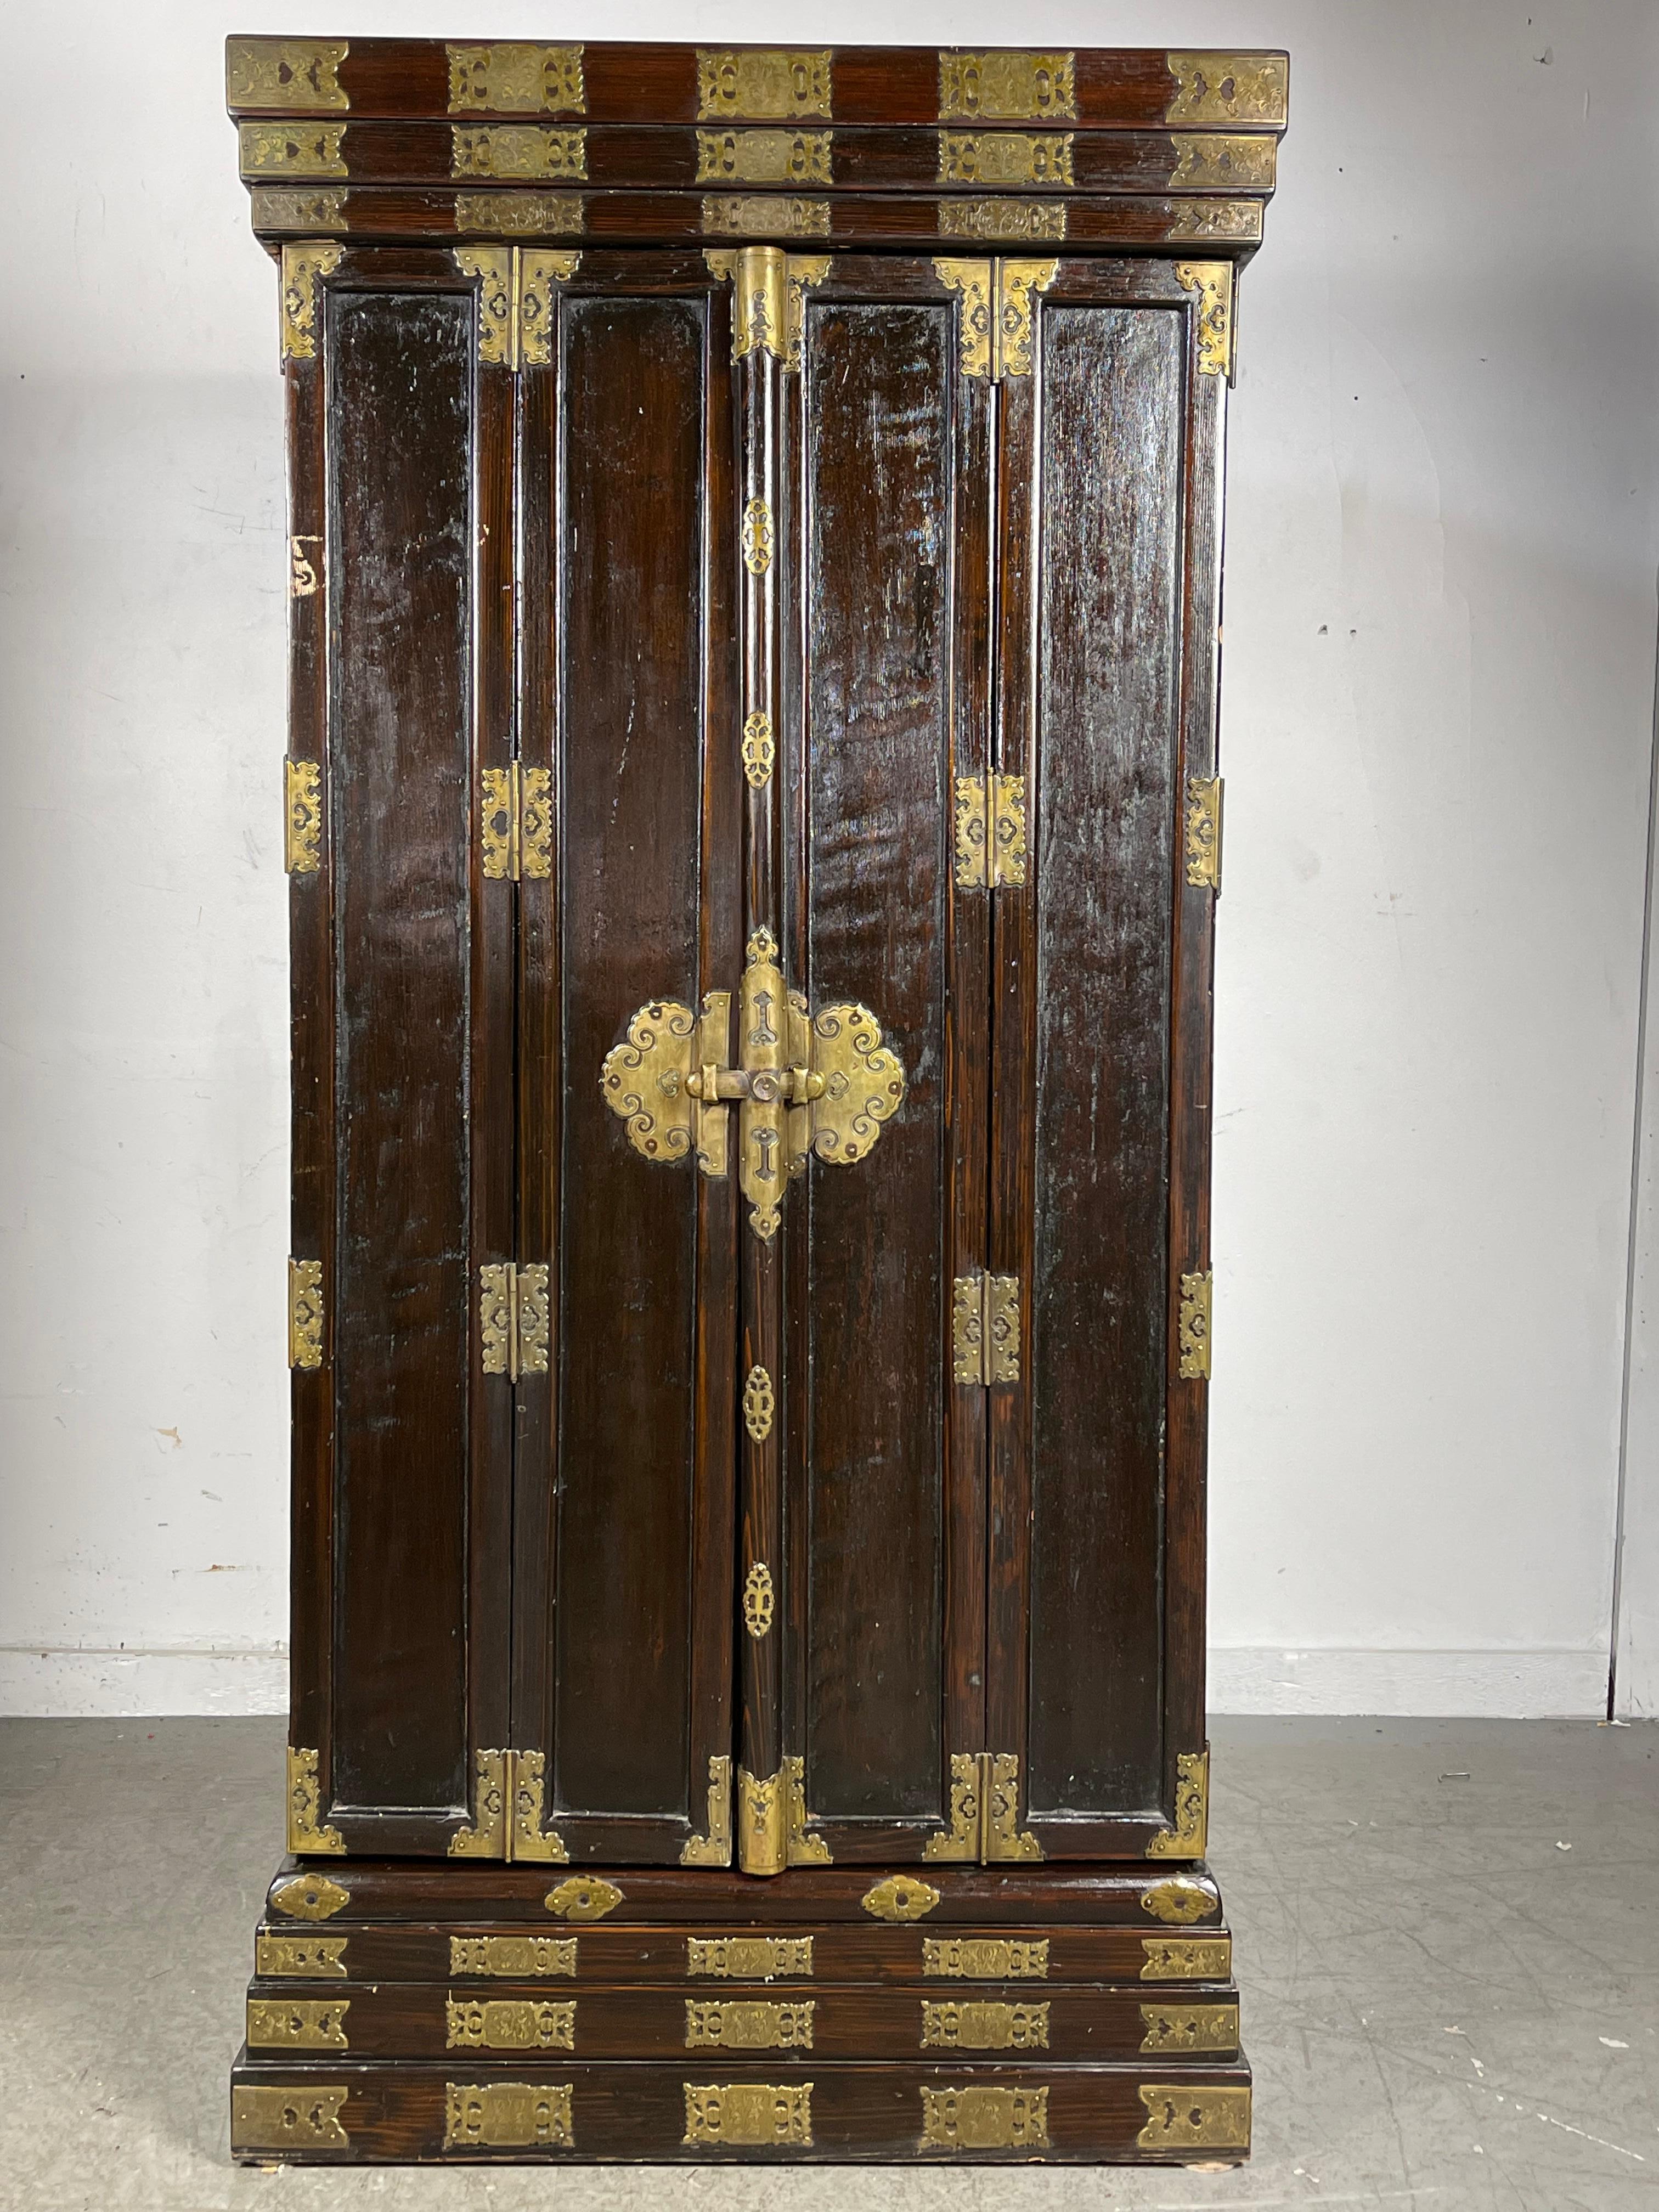 Late 19th century Monumental Japanese black lacquered shrine with finely detailed patinated brass fittings / two hinged doors / gilded brass enameled upper arch / fully gilded interior / carved gilt wood ,, Very fine detailed carvings with all